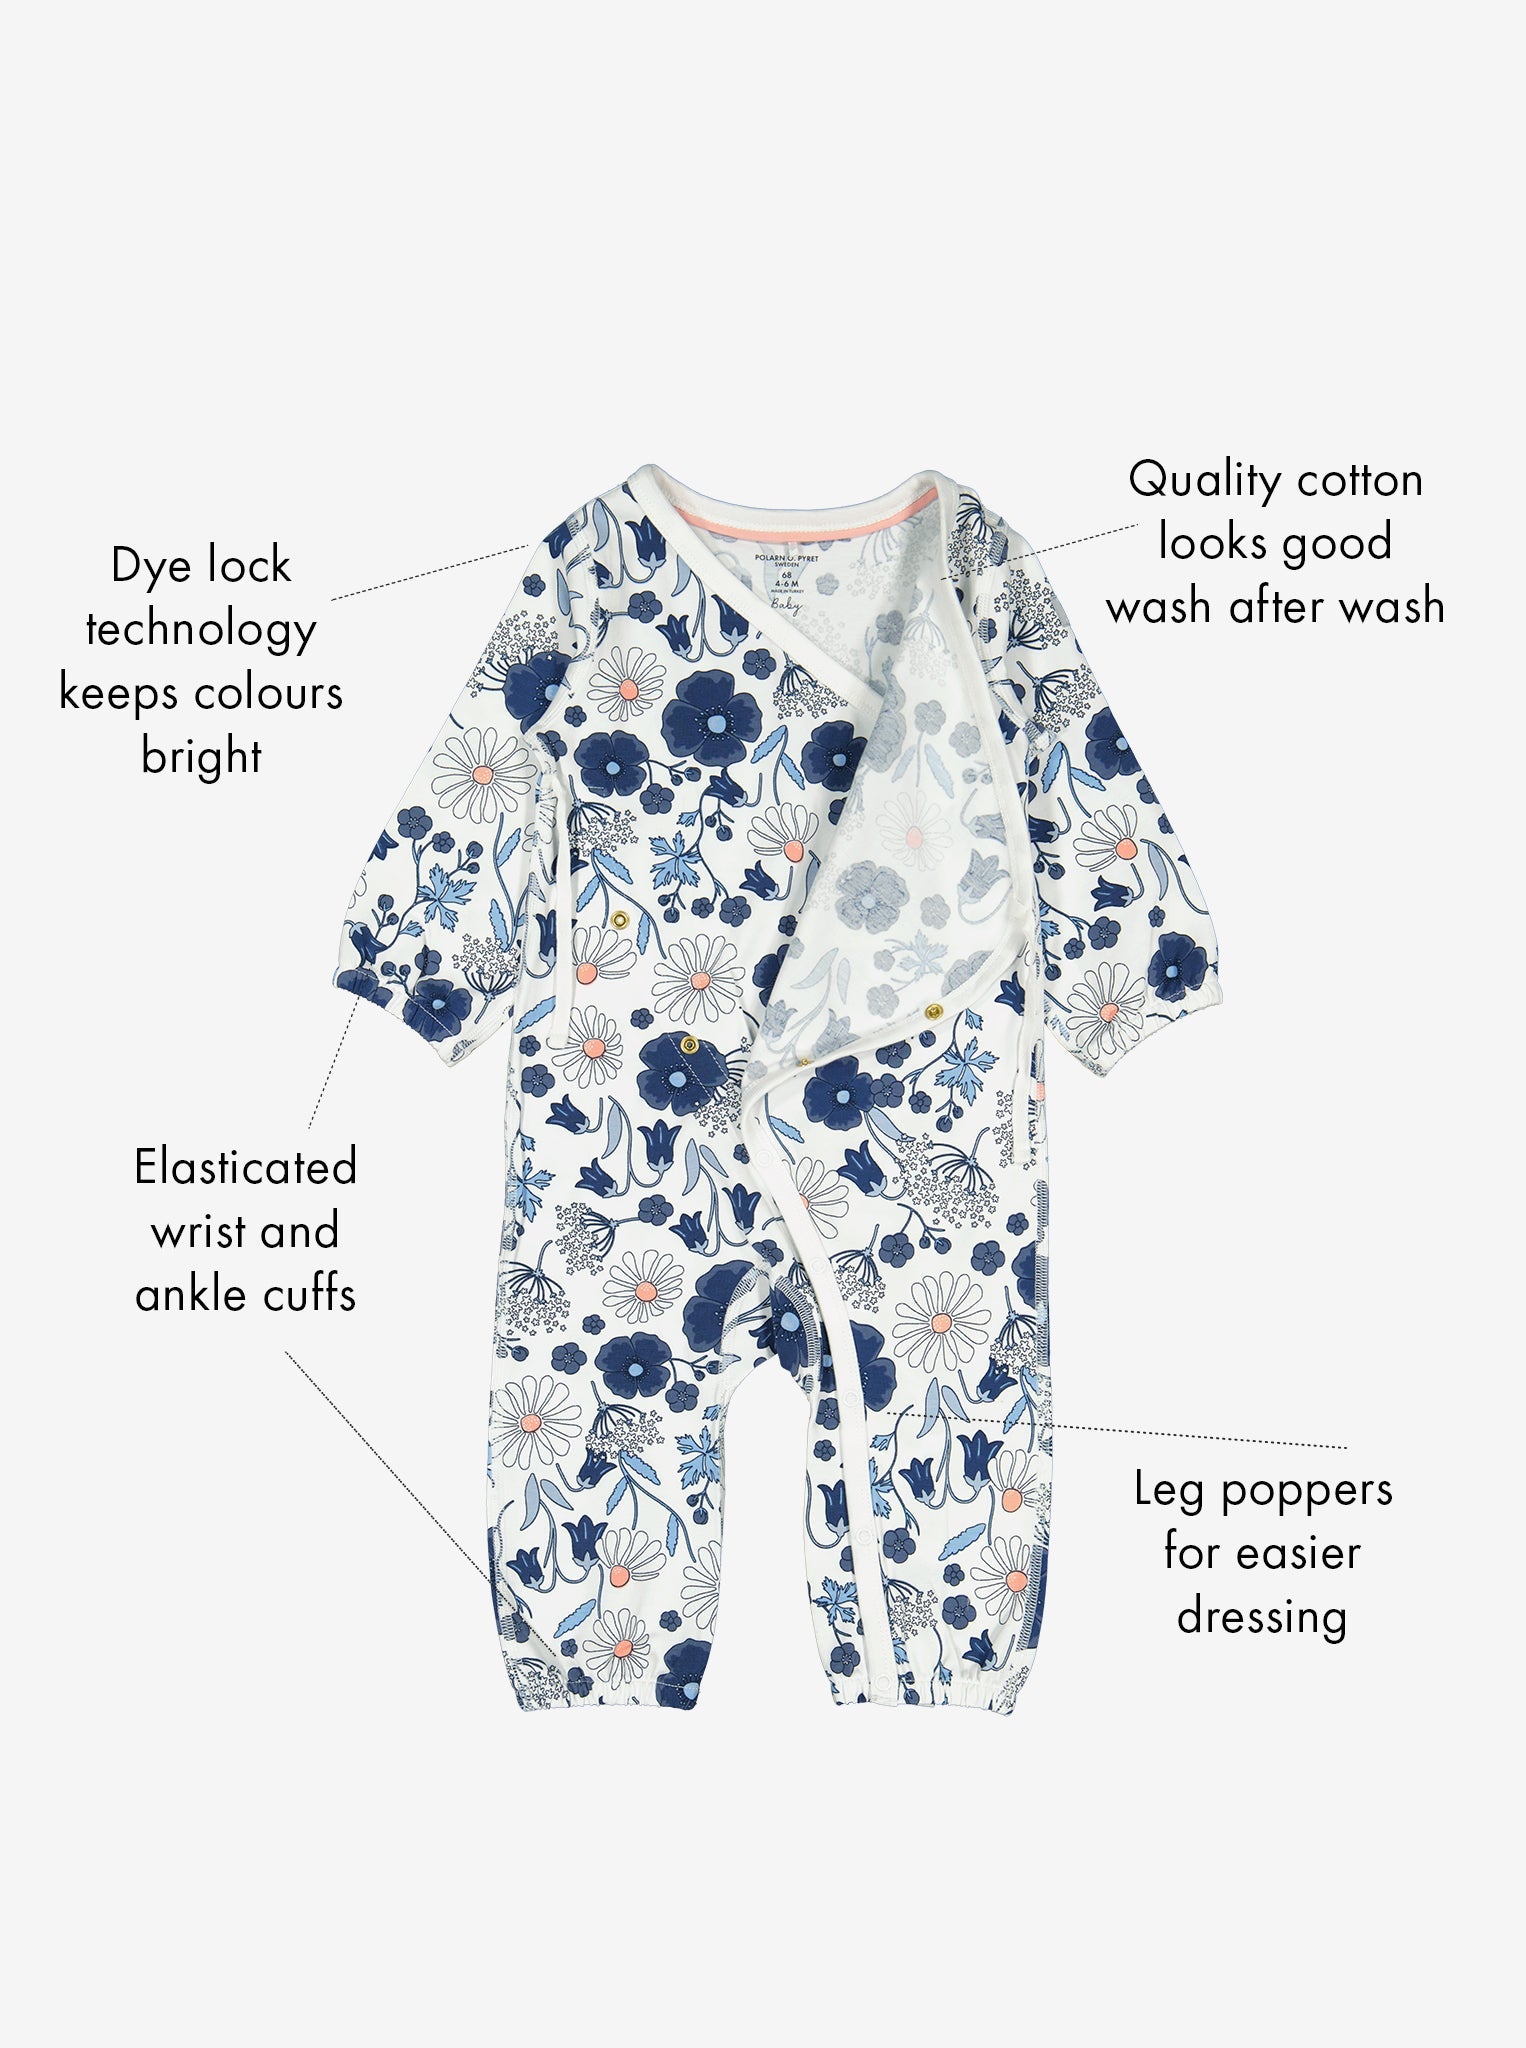 Floral Print Newborn Baby Romper from Polarn O. Pyret Kidswear. Ethically made and sustainably sourced materials.